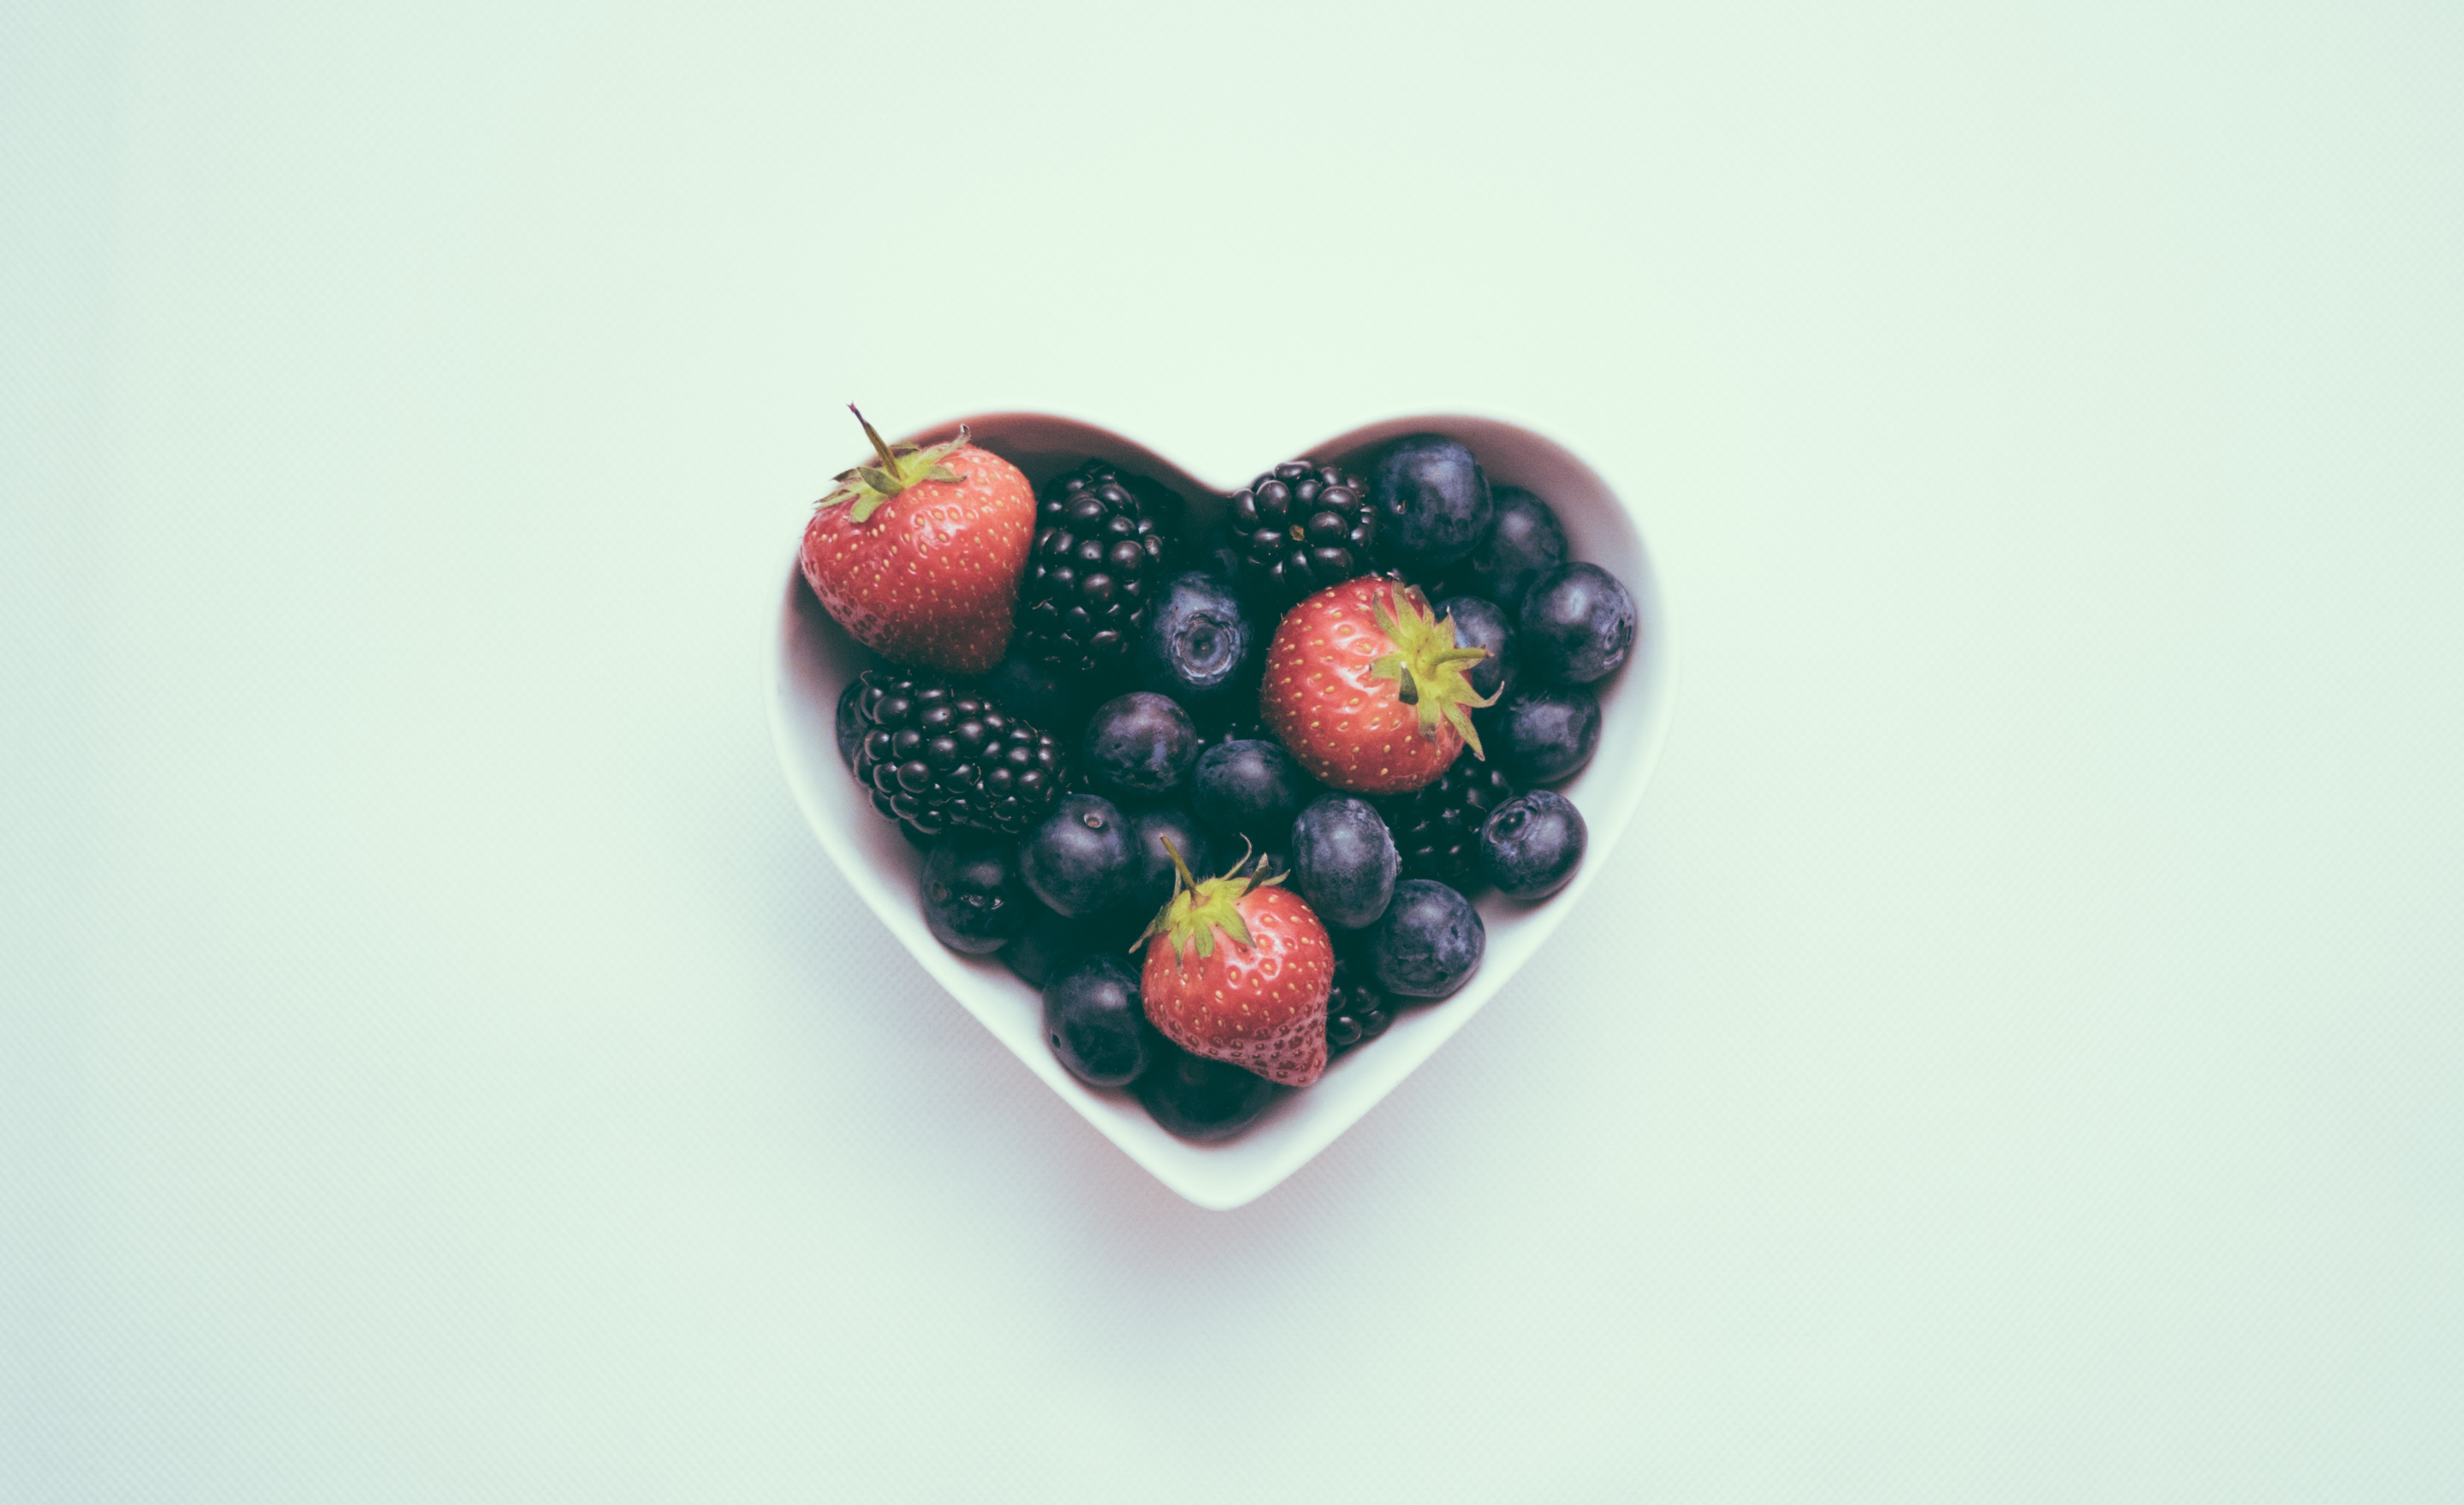 5 things a Nutritionist does daily to promote heart health